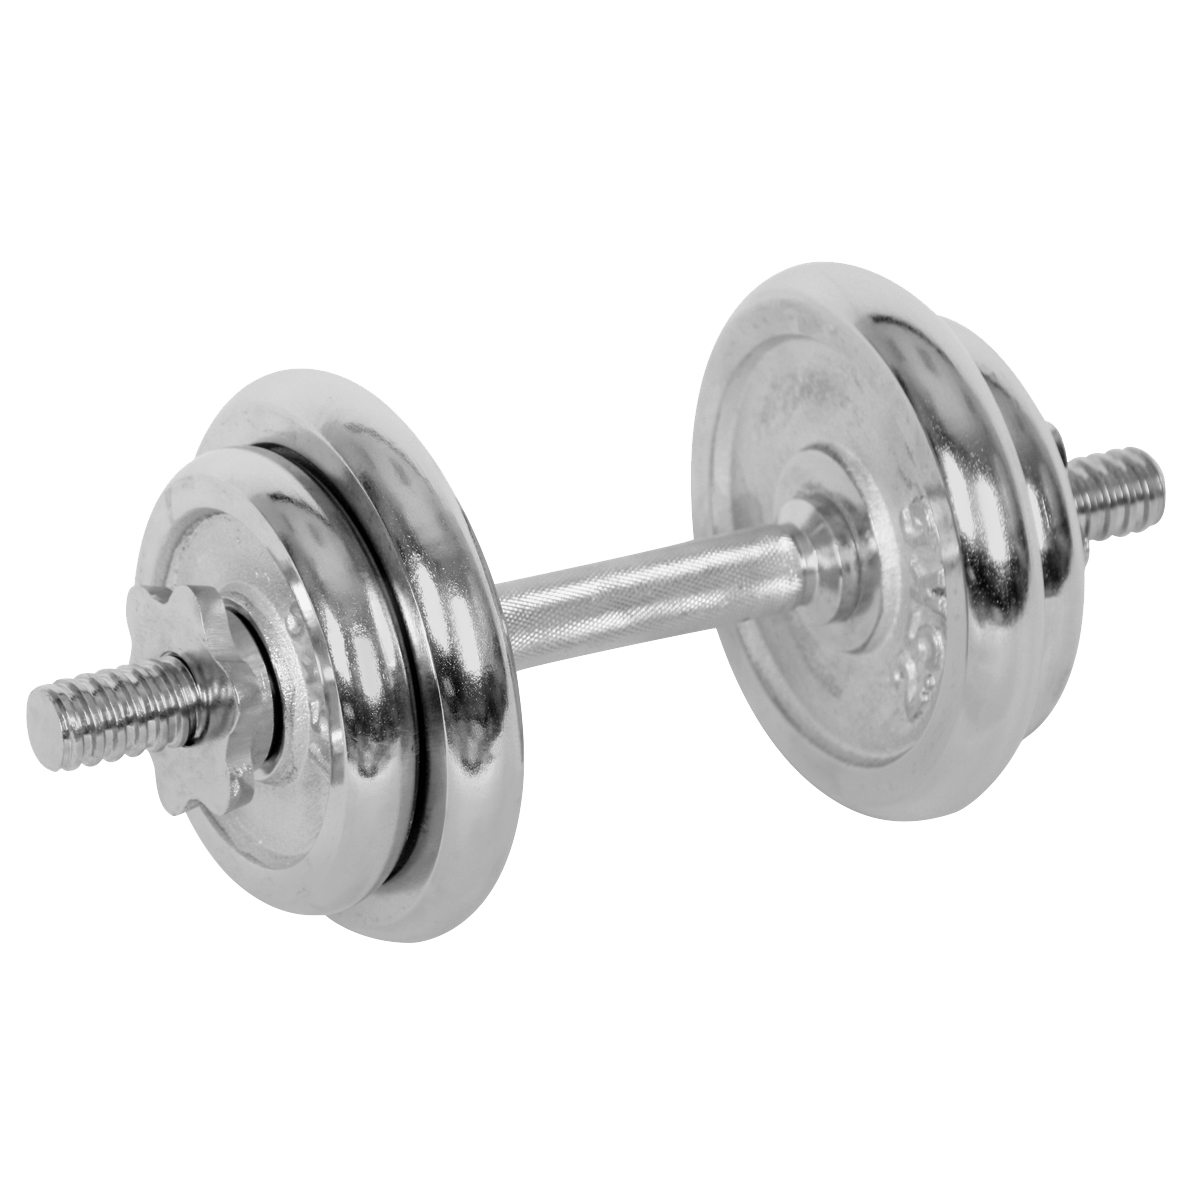 ONE-HAND WEIGHT 10 kg CHROME - One-hand adjustable weight